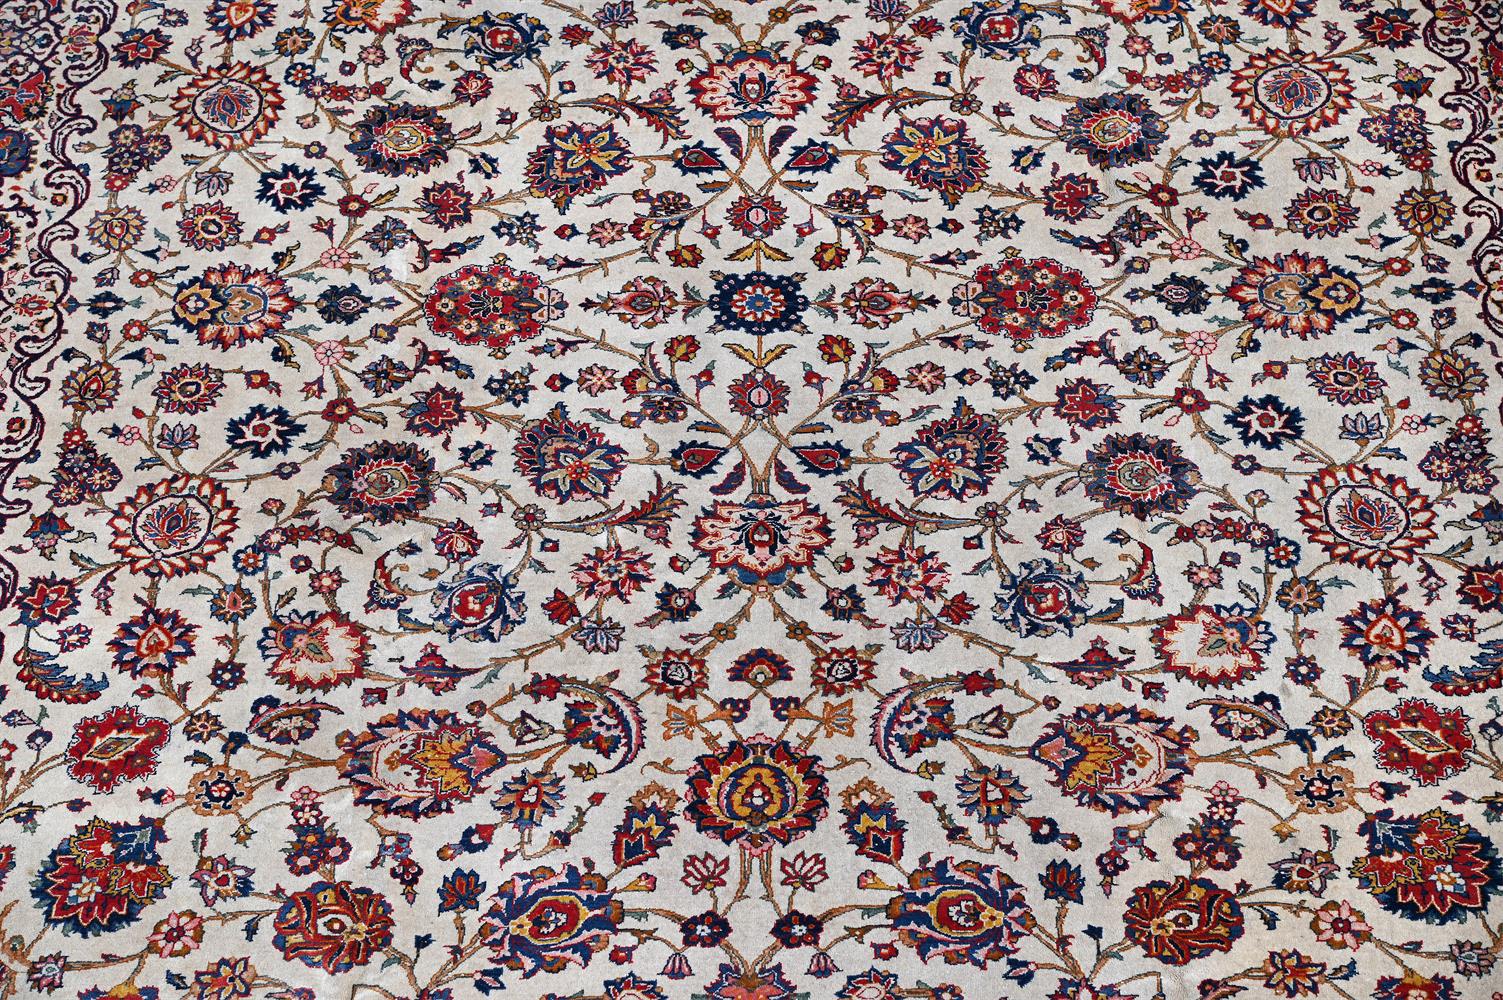 A KASHAN CARPET, approximately 385 x 289cm - Image 2 of 3